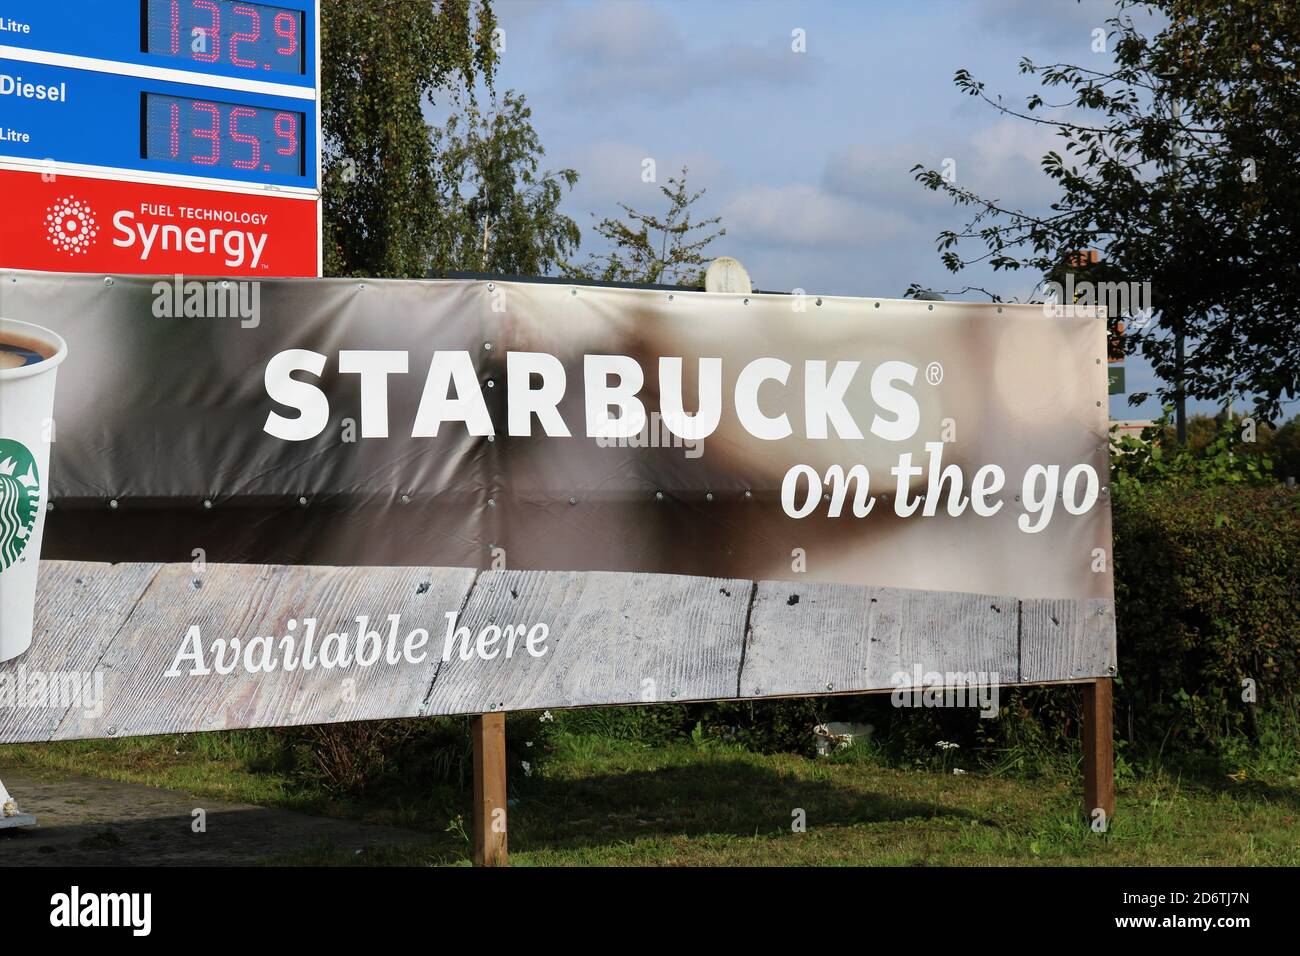 Starbucks ....on the go sign banner at Esso petrol station. Stock Photo